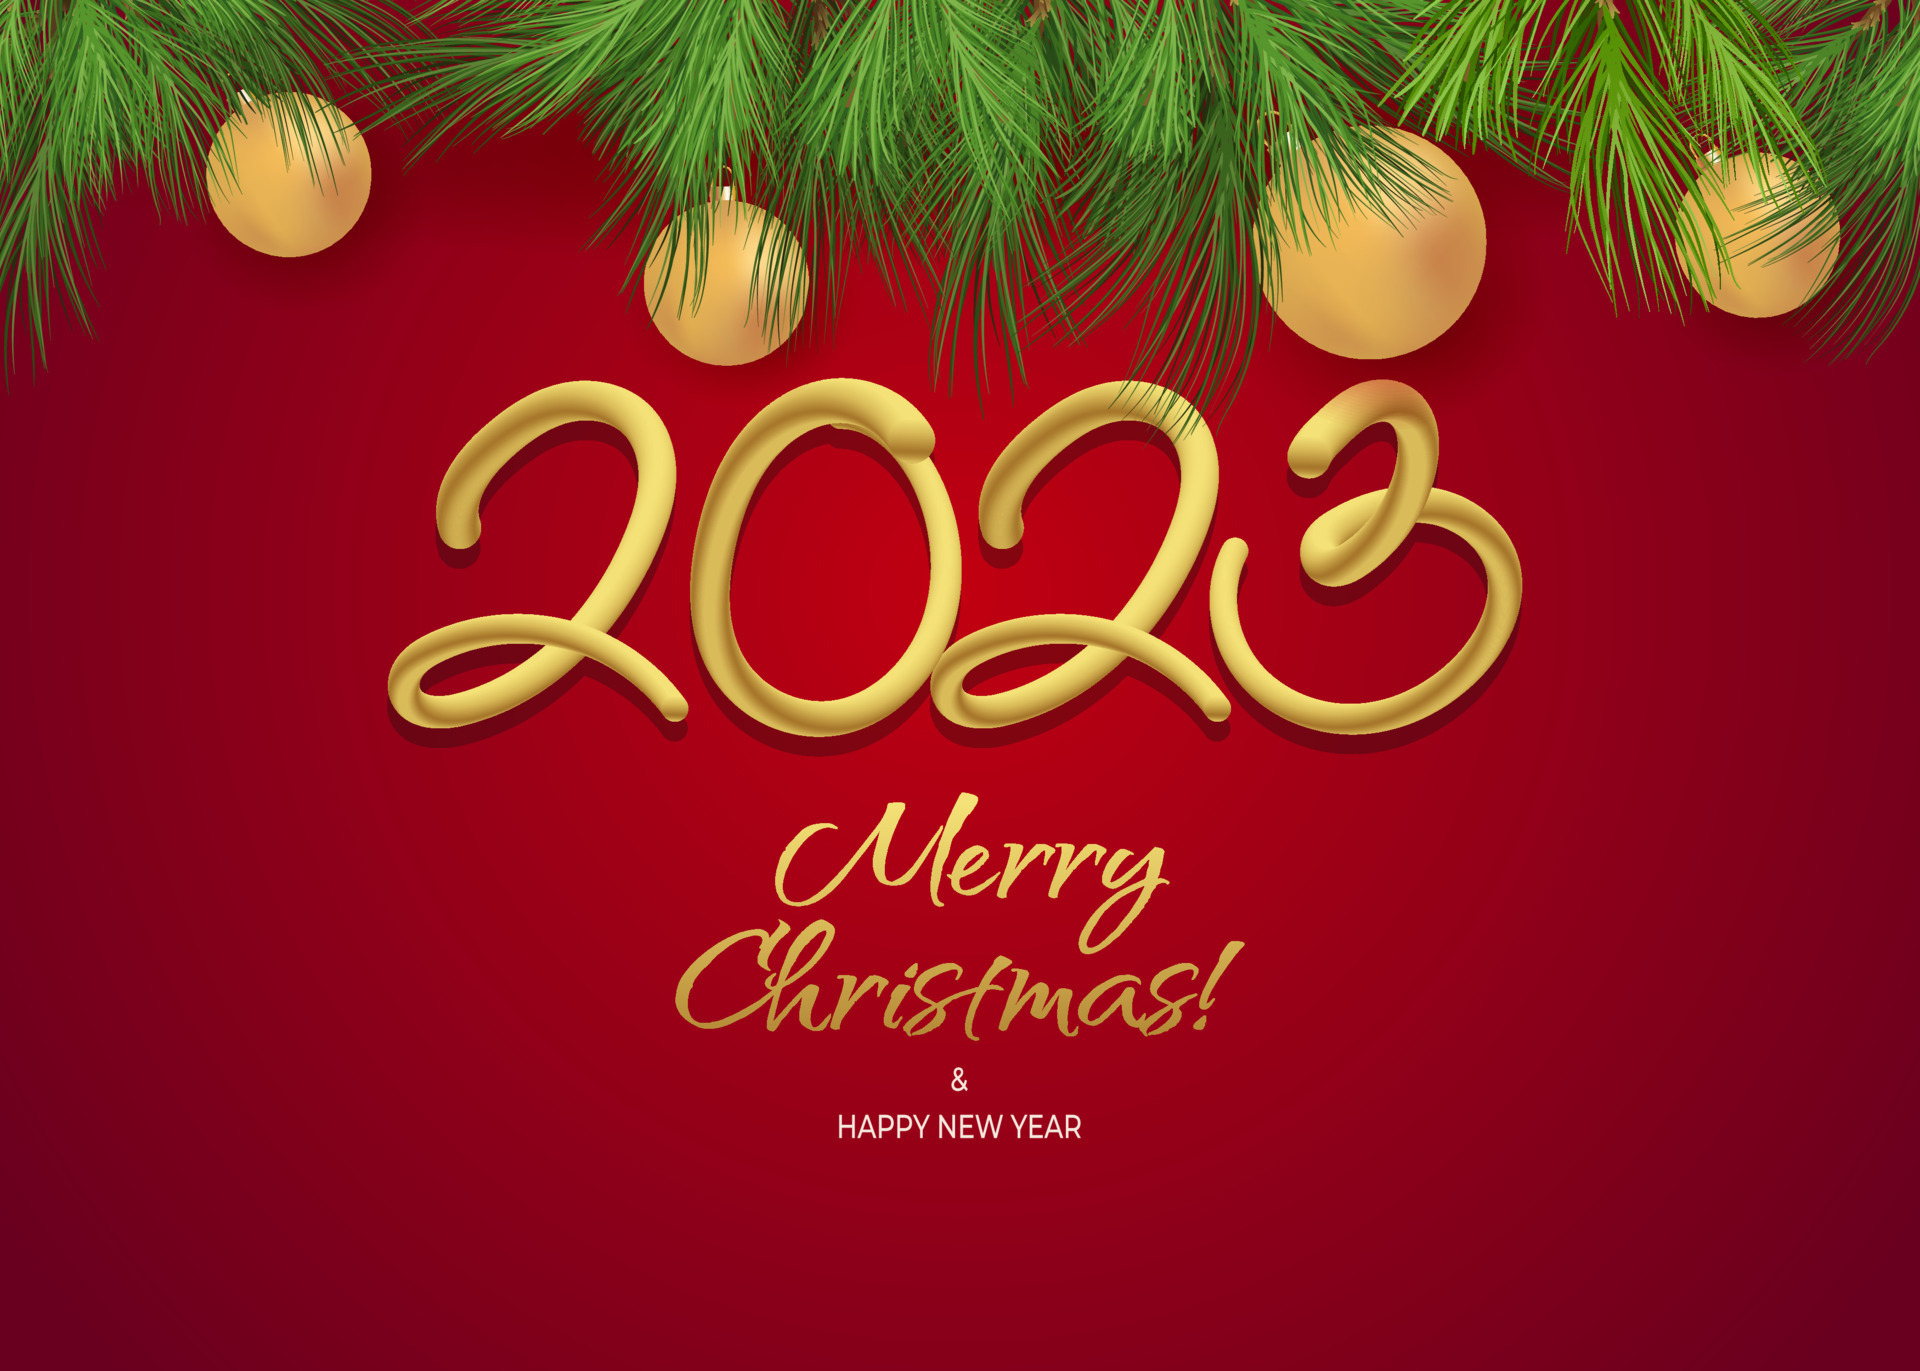 Happy new year 3d 2023 greeting wallpaper vector template. Merry Christmas  design greeting text with christmas decor elements such as a fir tree  branch with balls on a red background with luxury